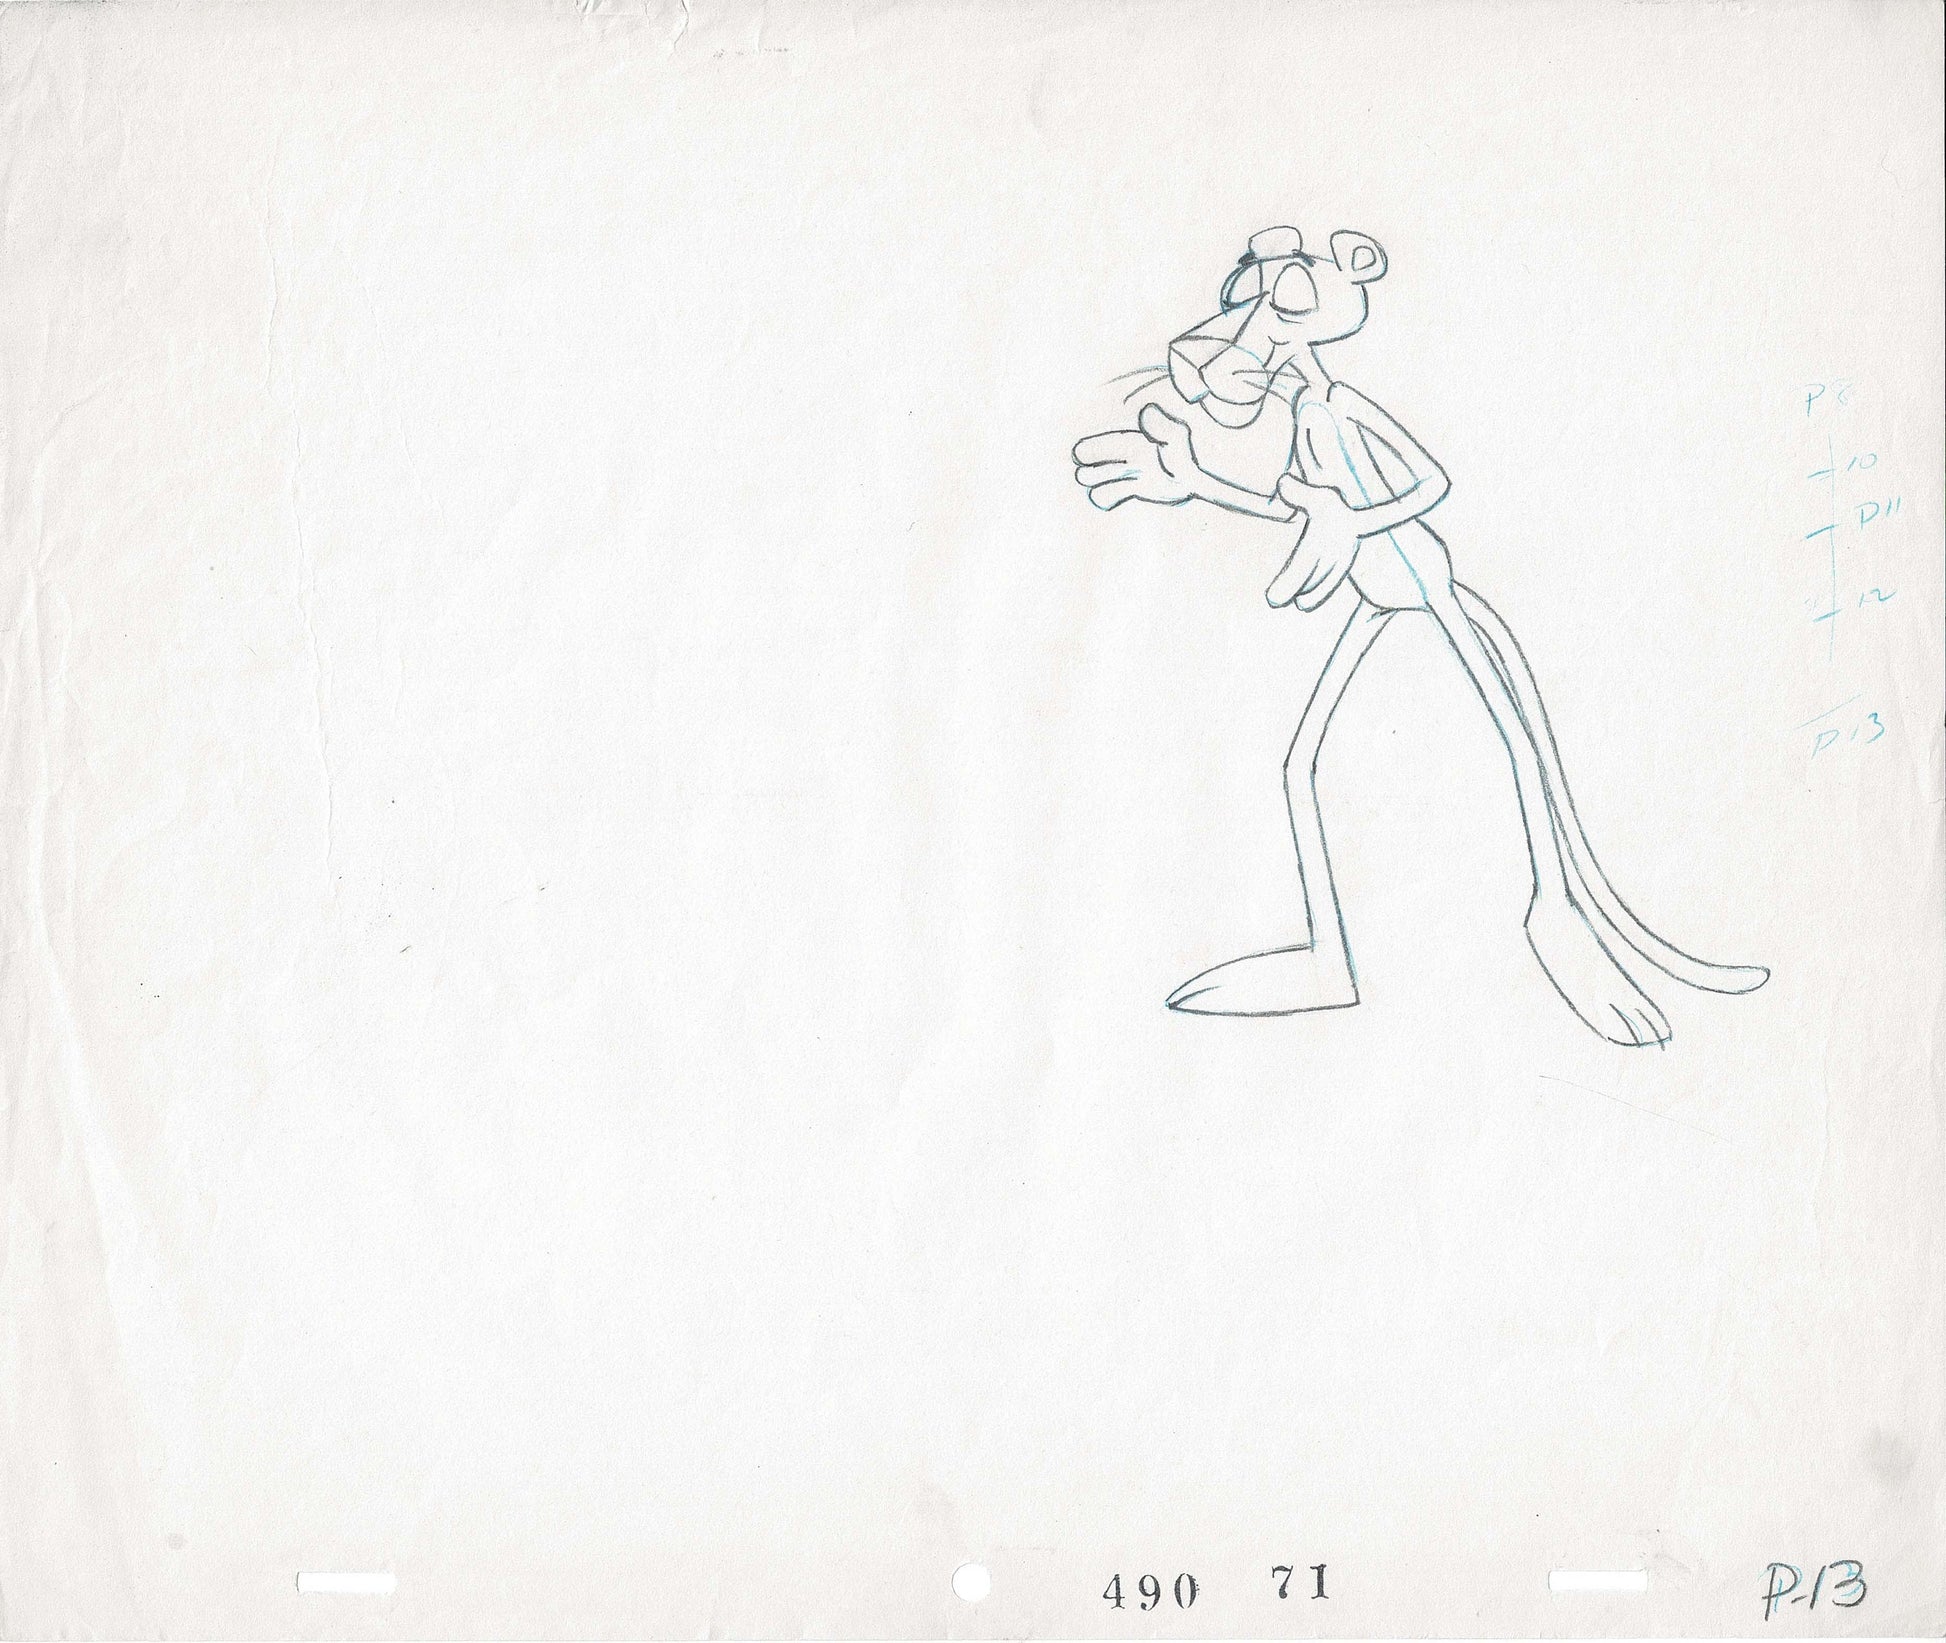 Pink Panther Animation Drawing DePatie-Freleng, c. 1970s by